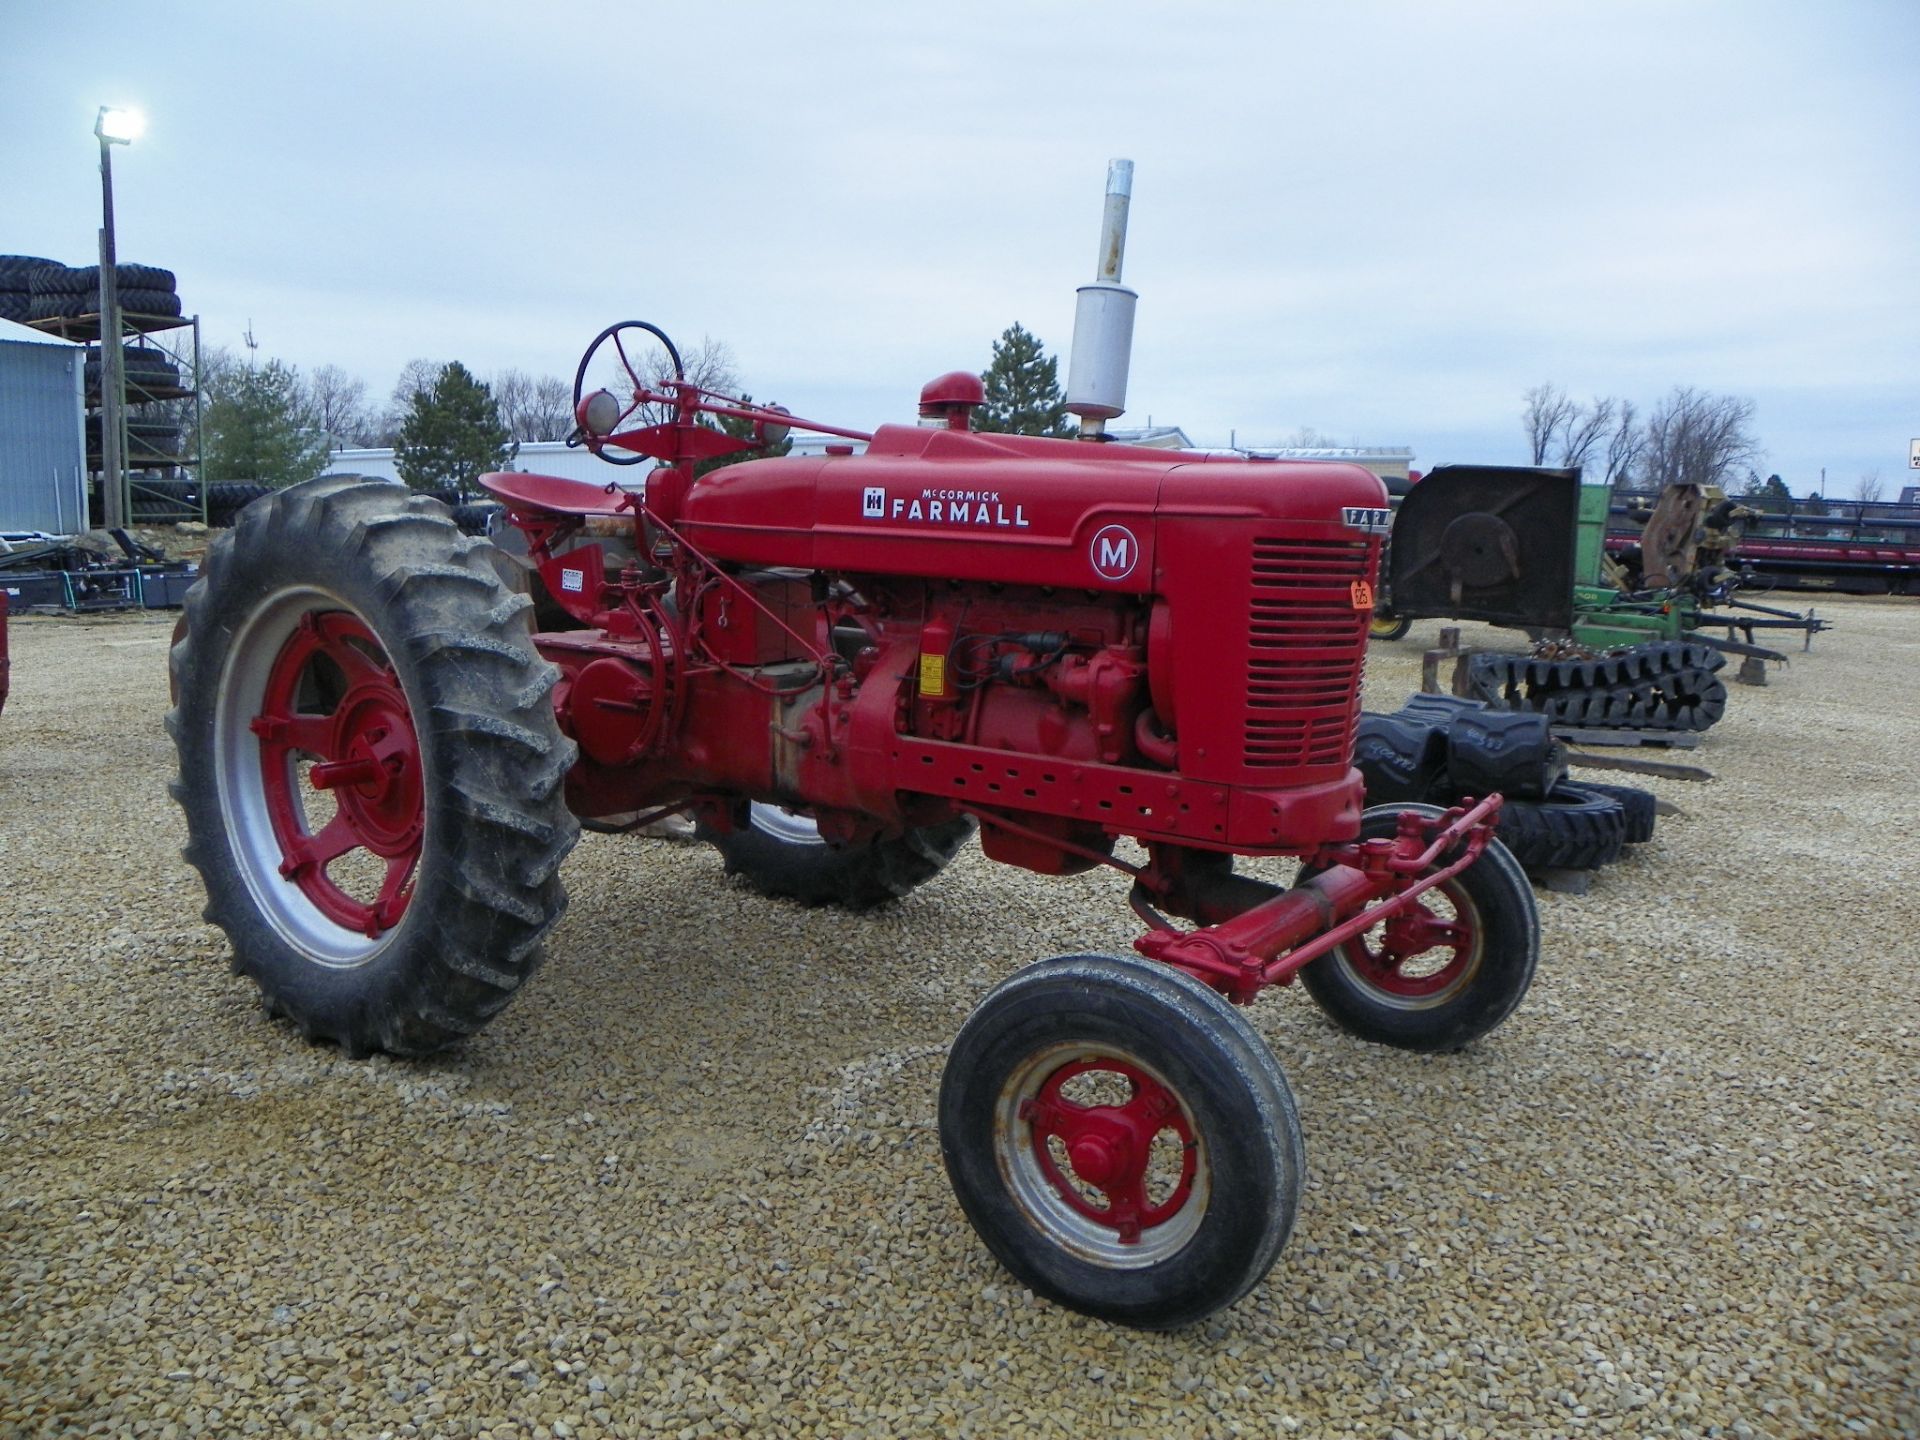 (Lot 625)  INTERNATIONAL M FARMALL TRACTOR OPEN STATION, WIDE-FRONT, GAS, PTO, HAS STUCK ENGINE - Image 2 of 2